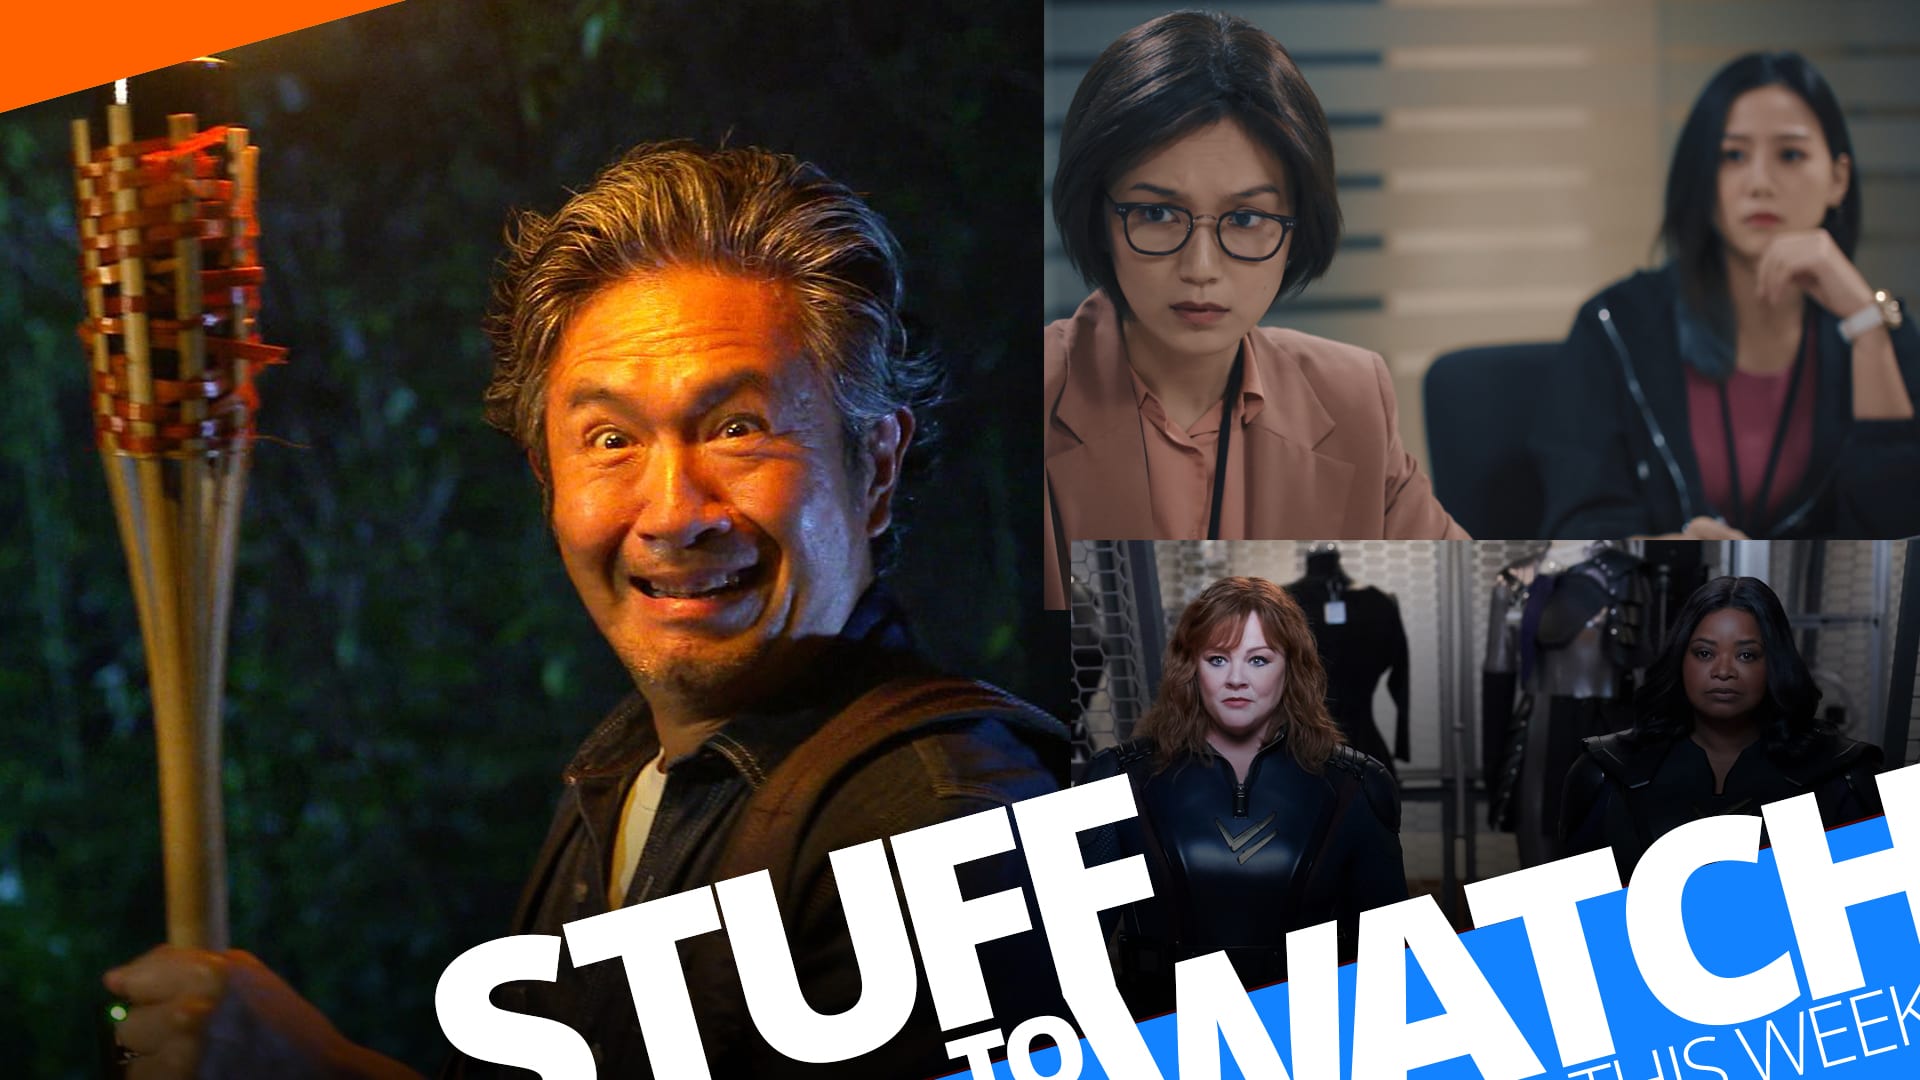 Stuff To Watch This Week (Apr 5-11, 2021)